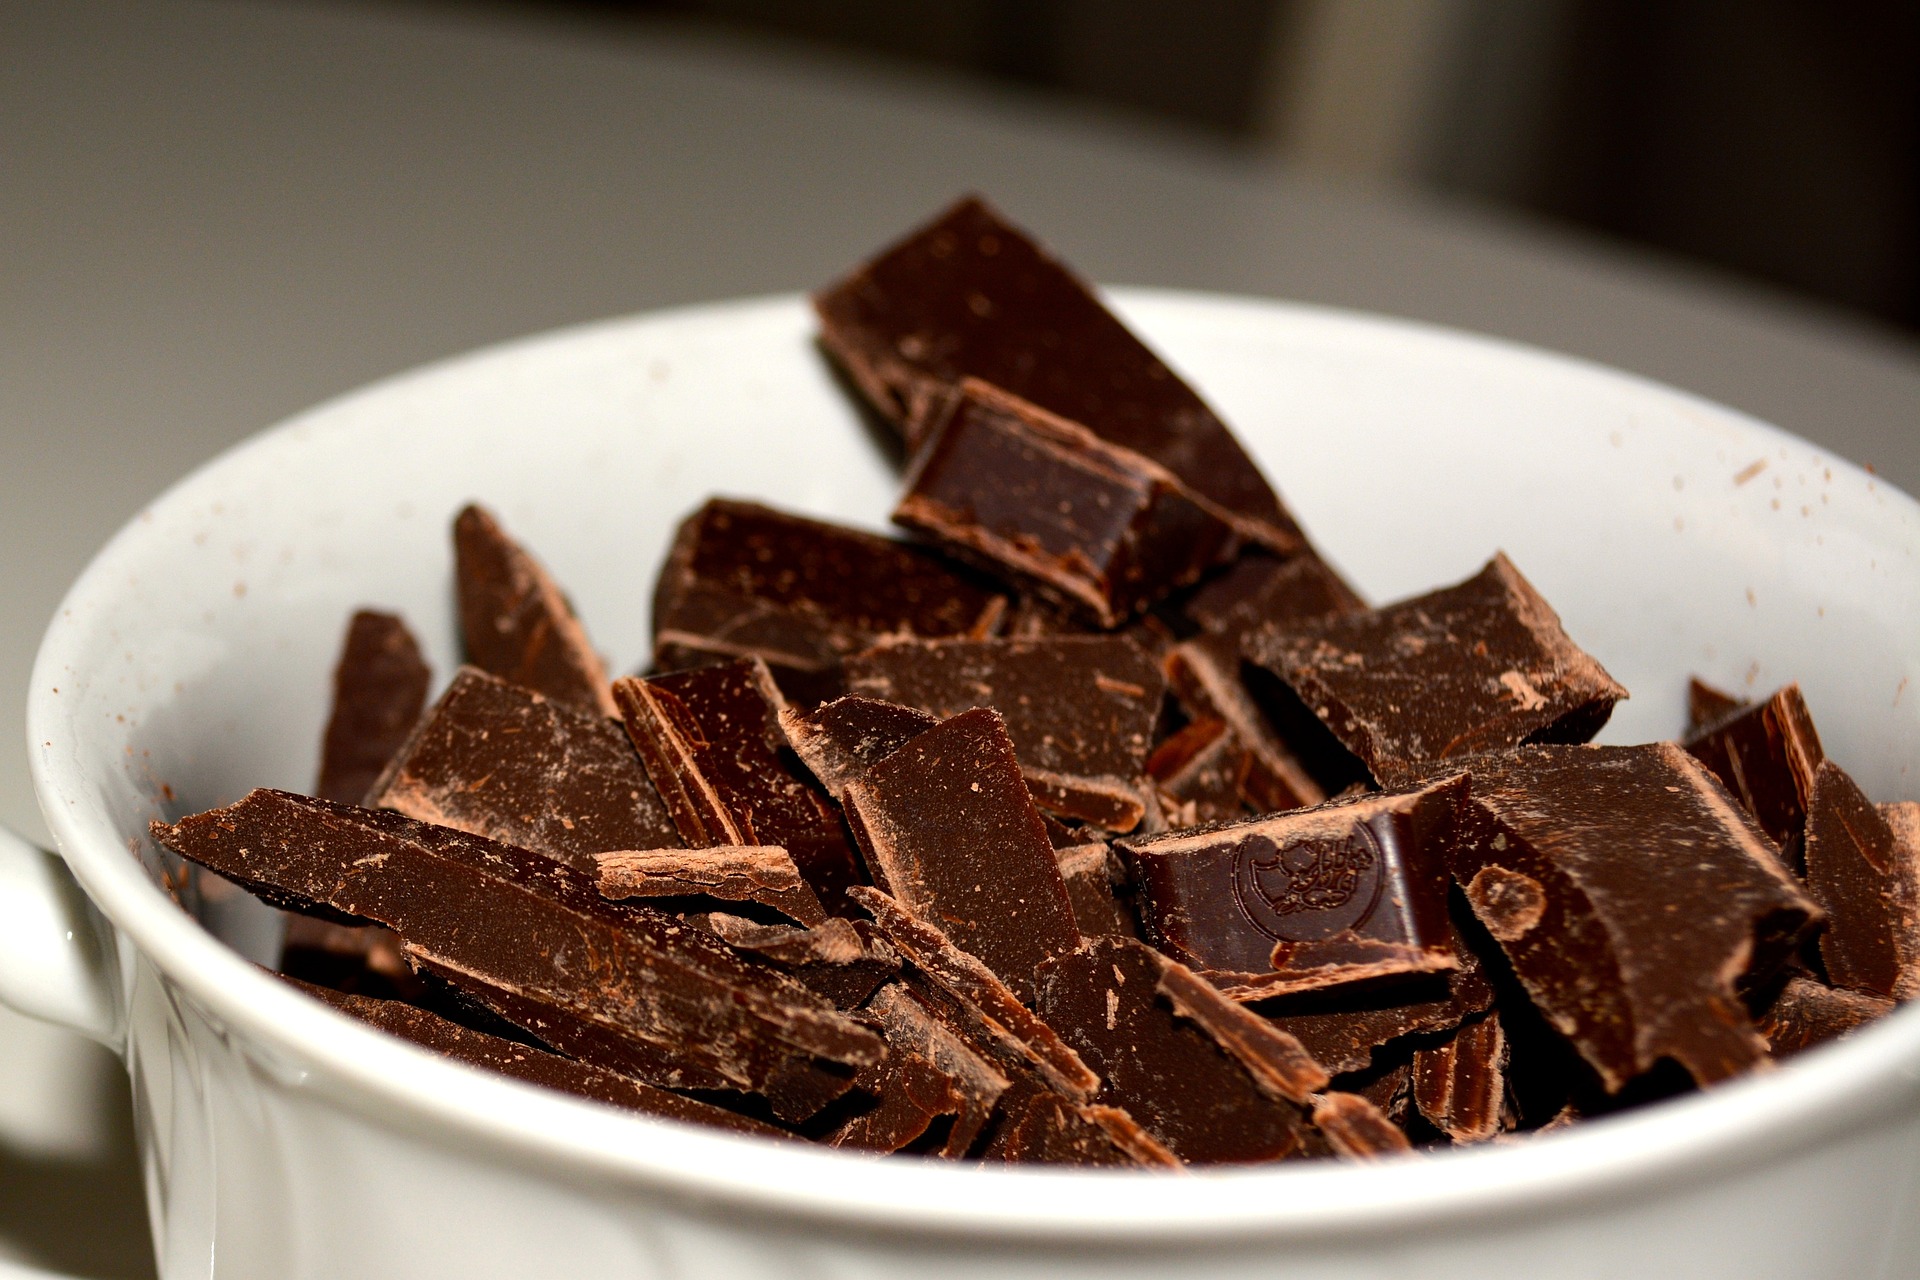 It's National Dark Chocolate Day! Here's 5 reasons to make the switch